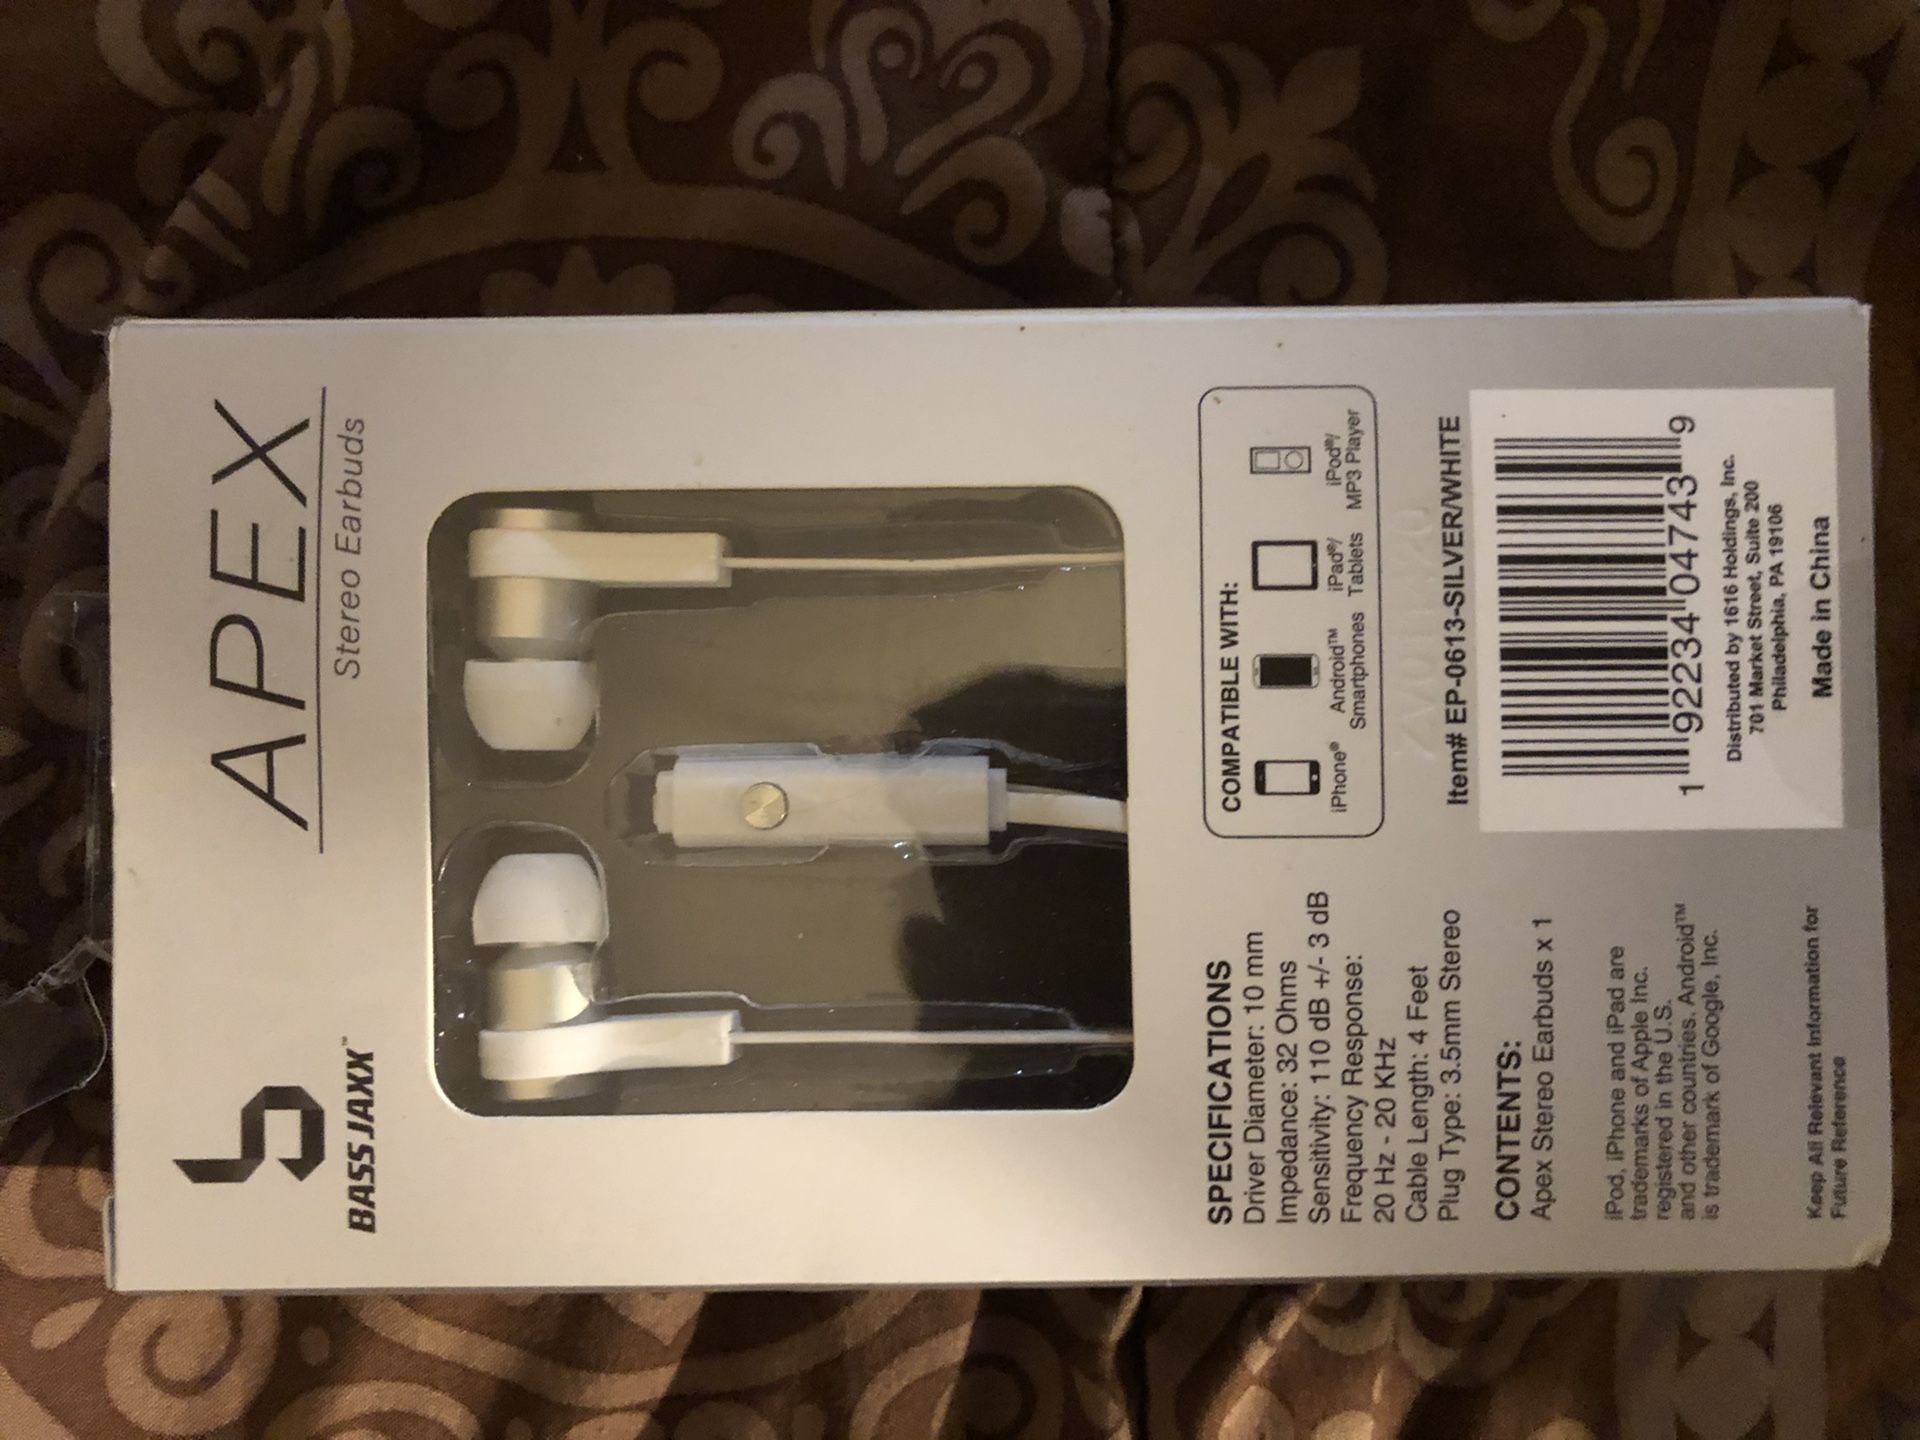 Apex stereo earbuds